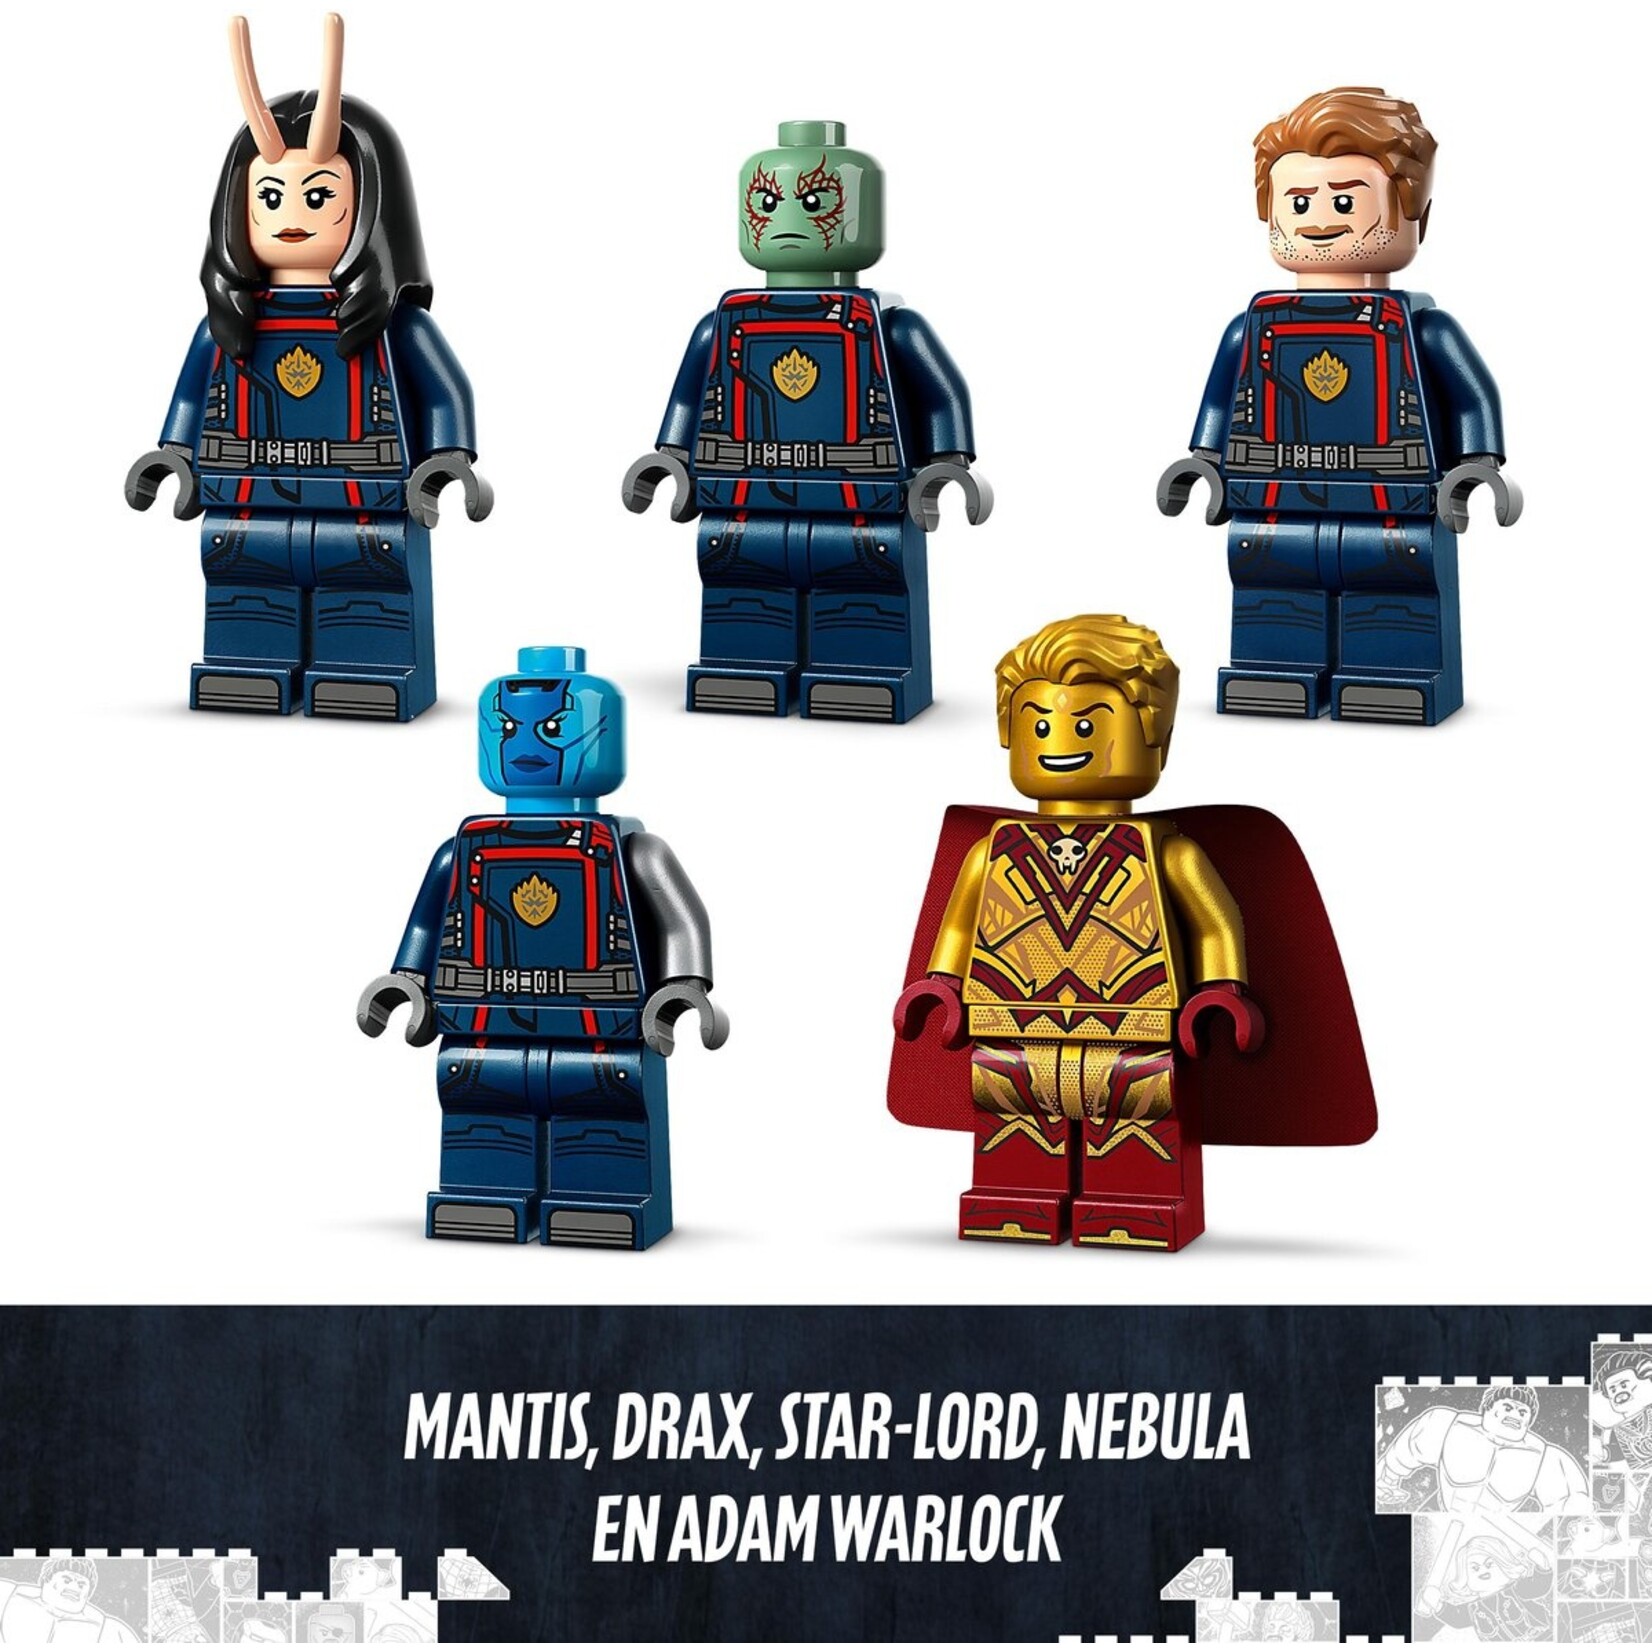 LEGO LEGO - Marvel - The ship of the new Guardians of the Galaxy